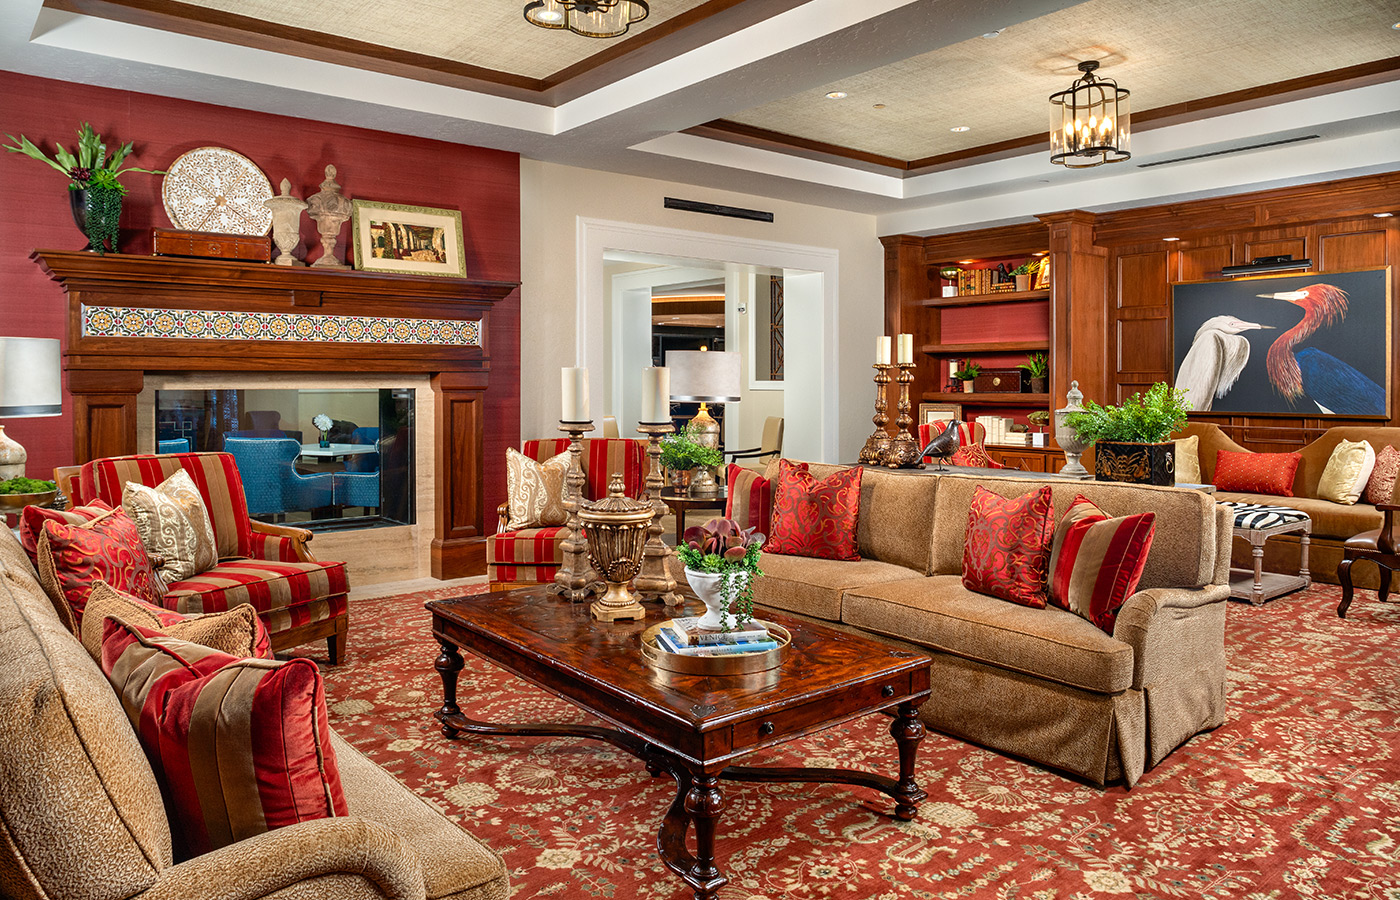 A family room with comfy seating.